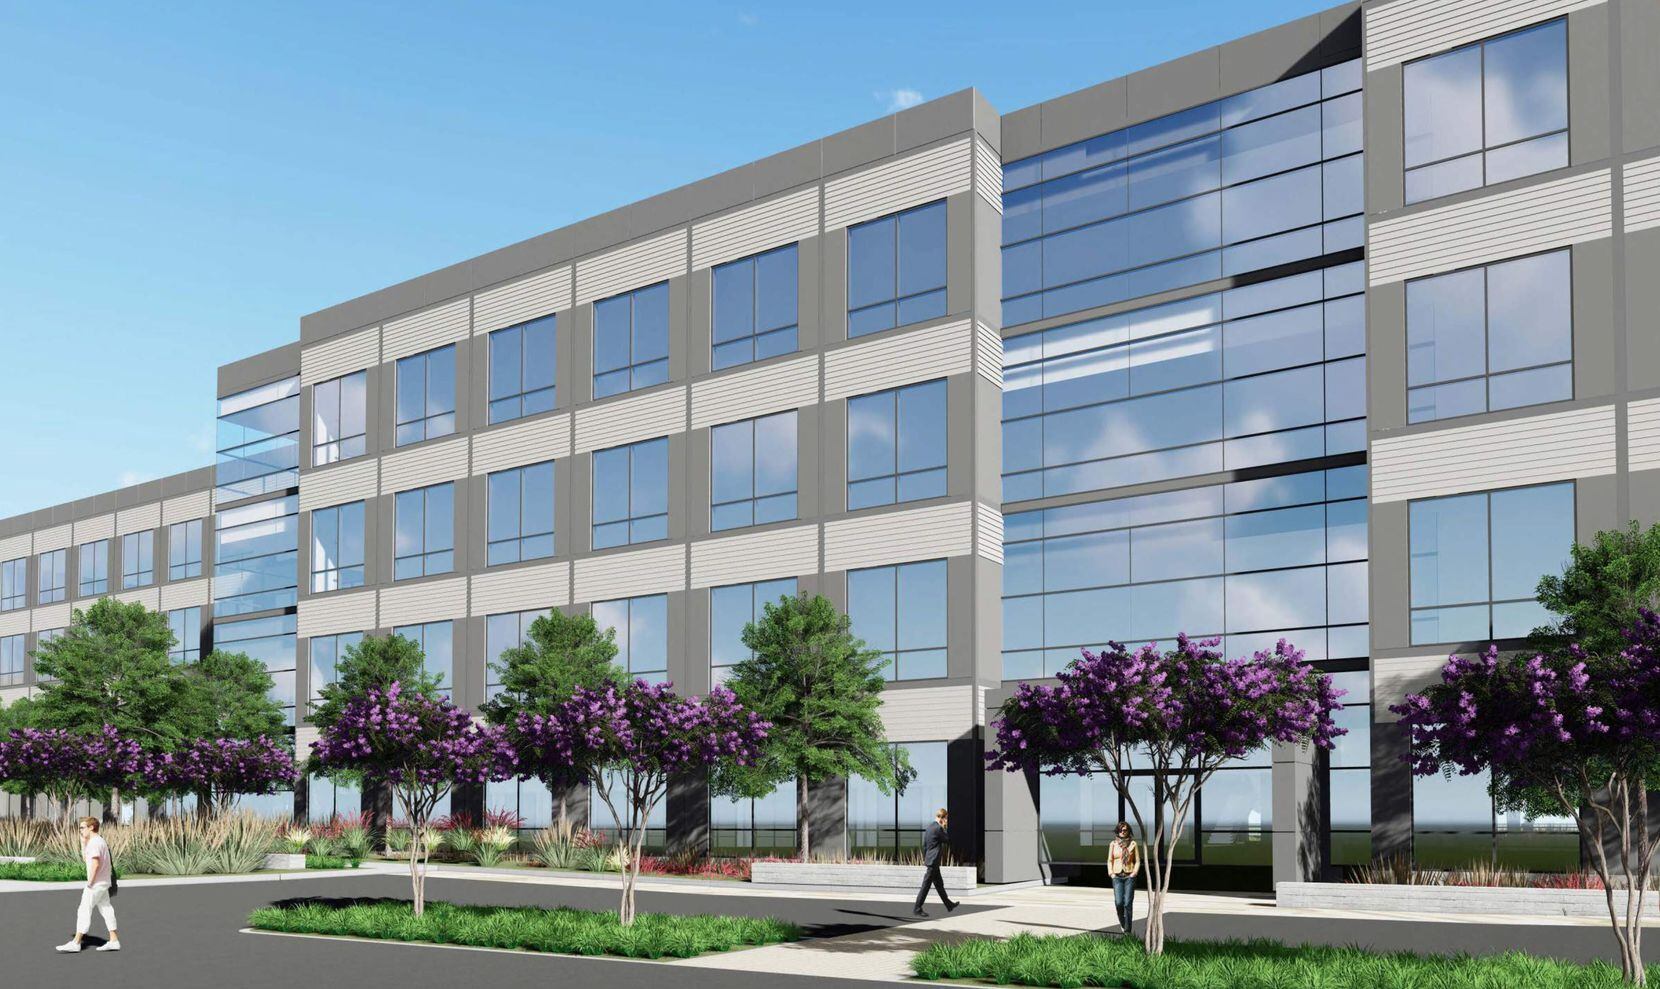 Developer Hillwood is starting construction on the four-story Hillwood Commons II building in the AllianceTexas development in North Fort Worth.